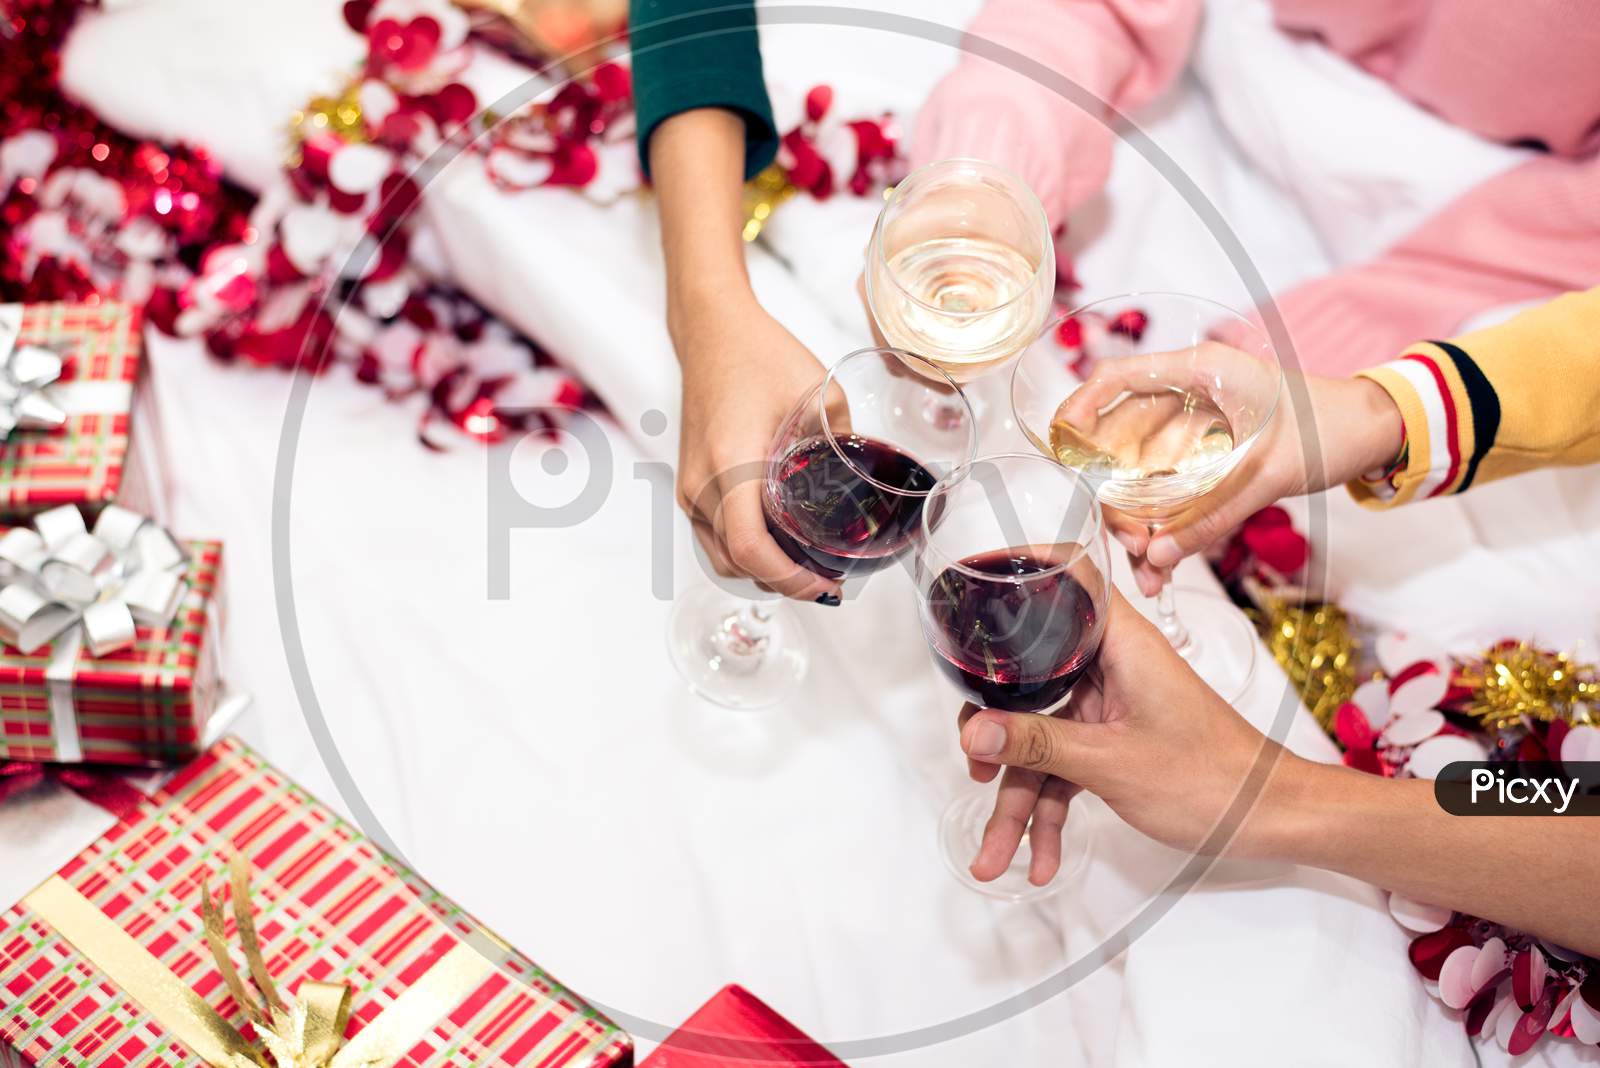 Hands Of People Celebrating New Year Party In Home With Wine Drinking Glasses. New Year And Christmas Party Concept. Happiness And Friendship Concept. Relation And Funny Together Theme. Clinking Glass